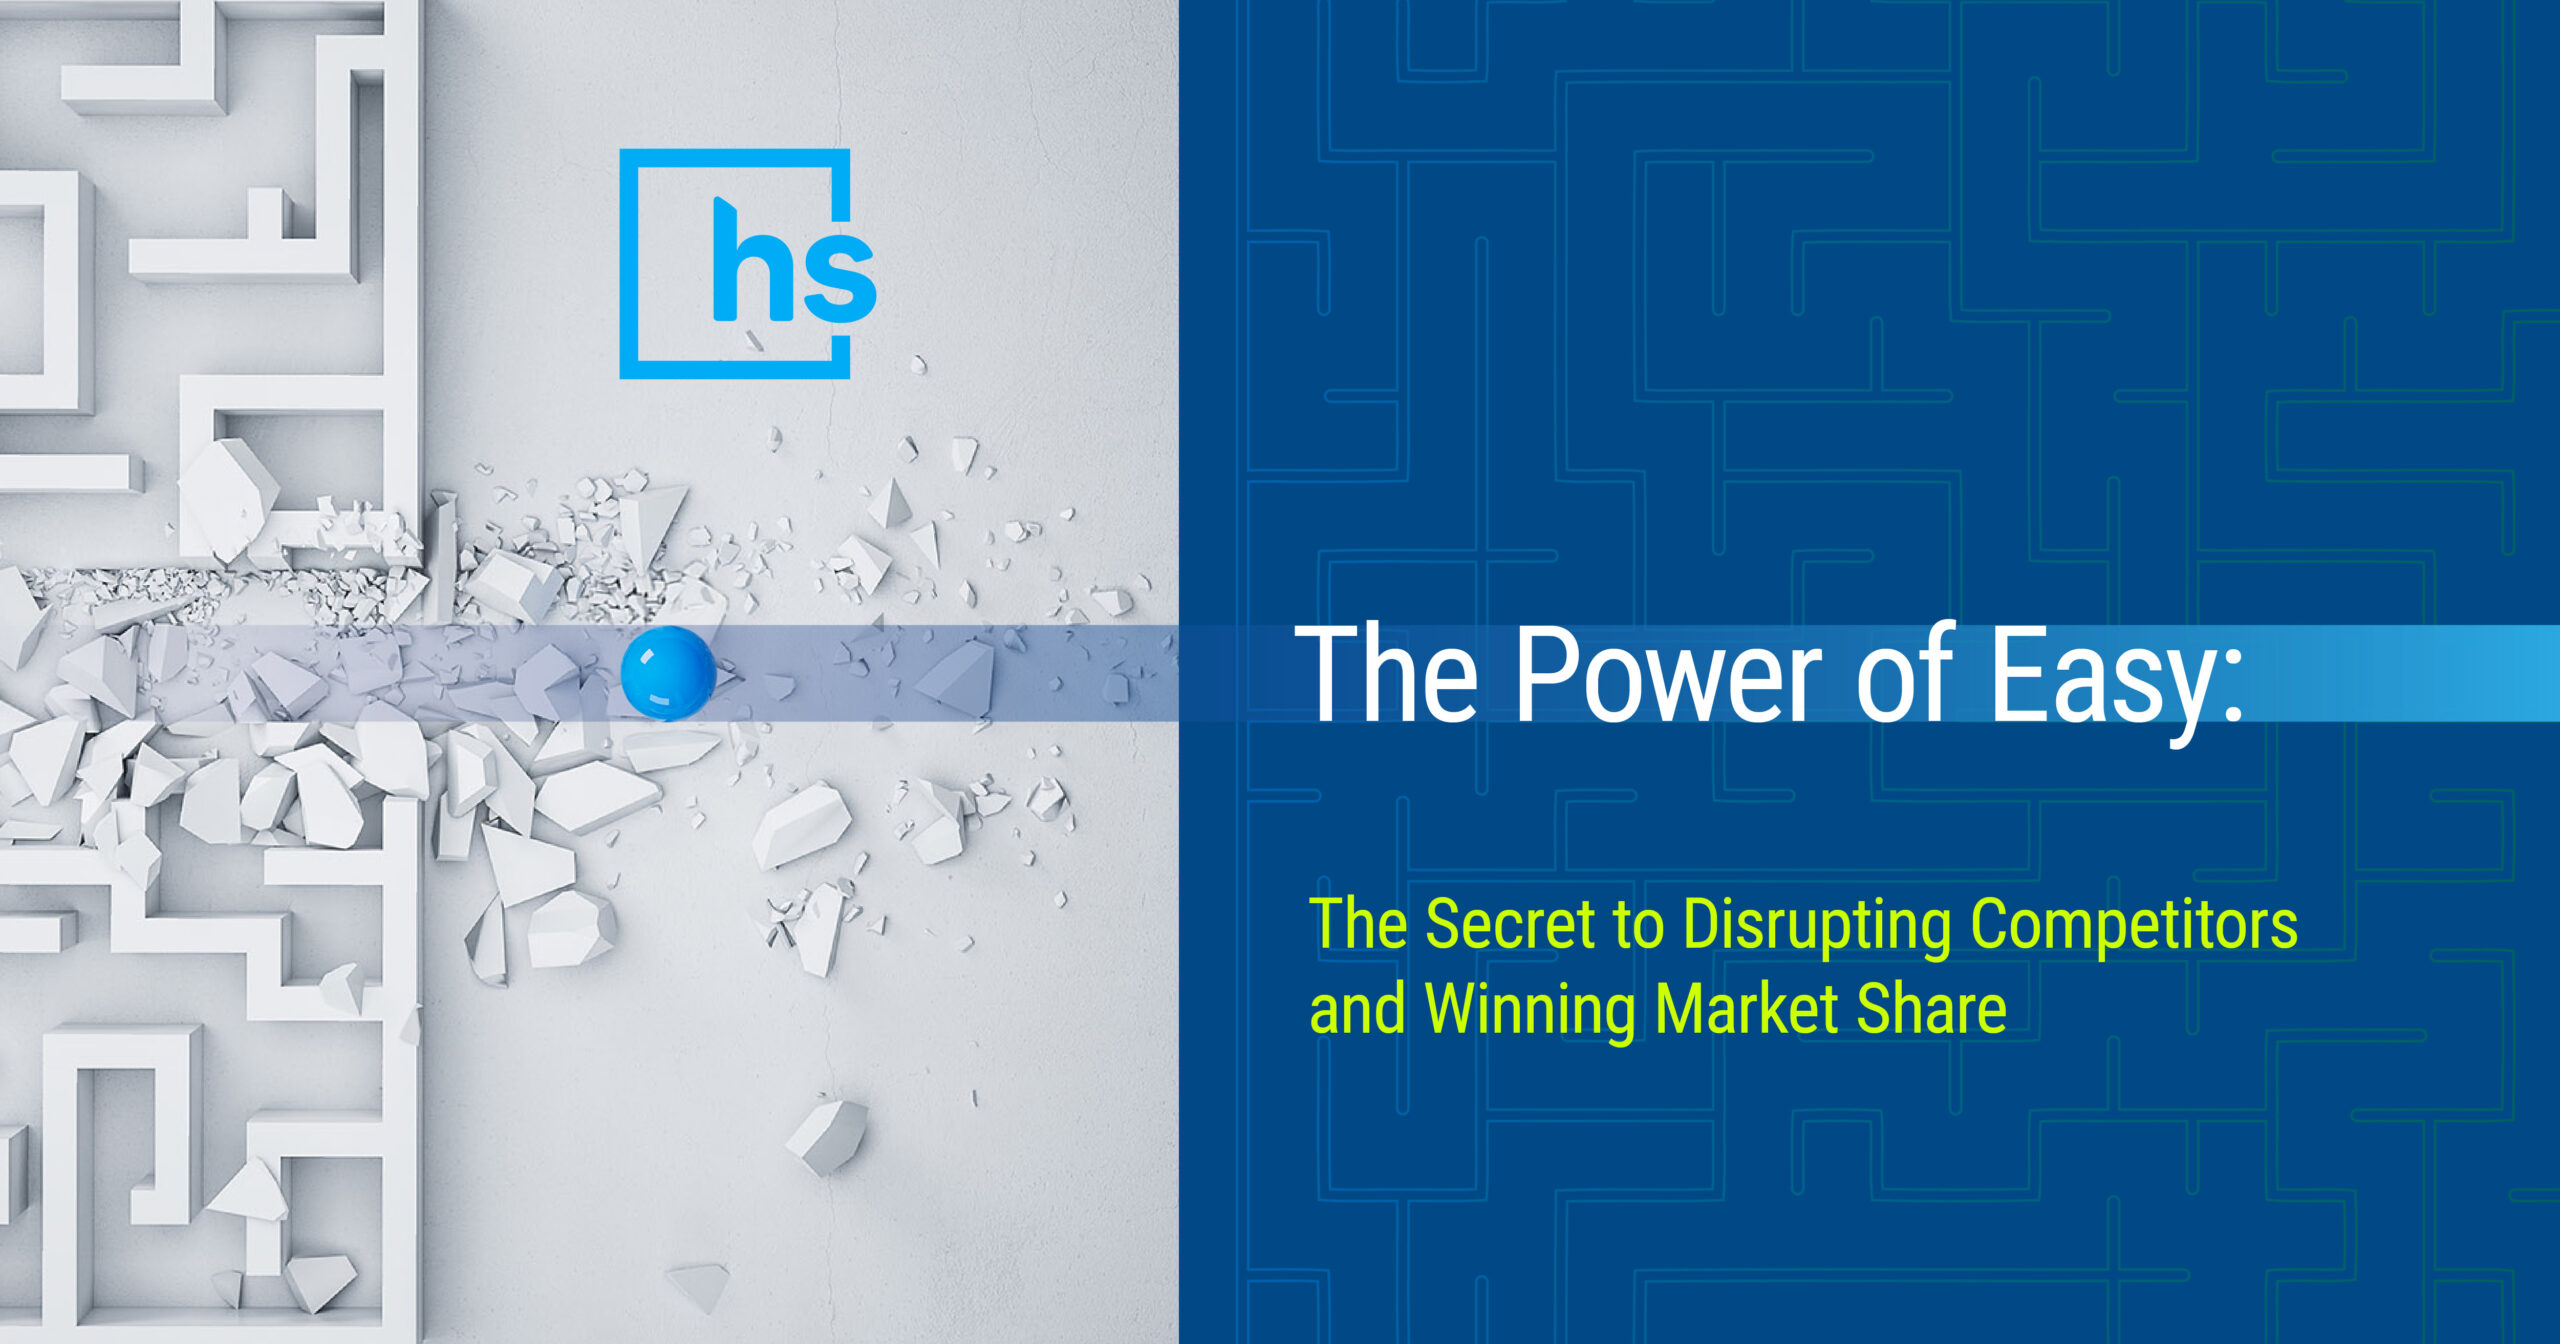 Easy: The Secret to Disruption and Winning Market Share